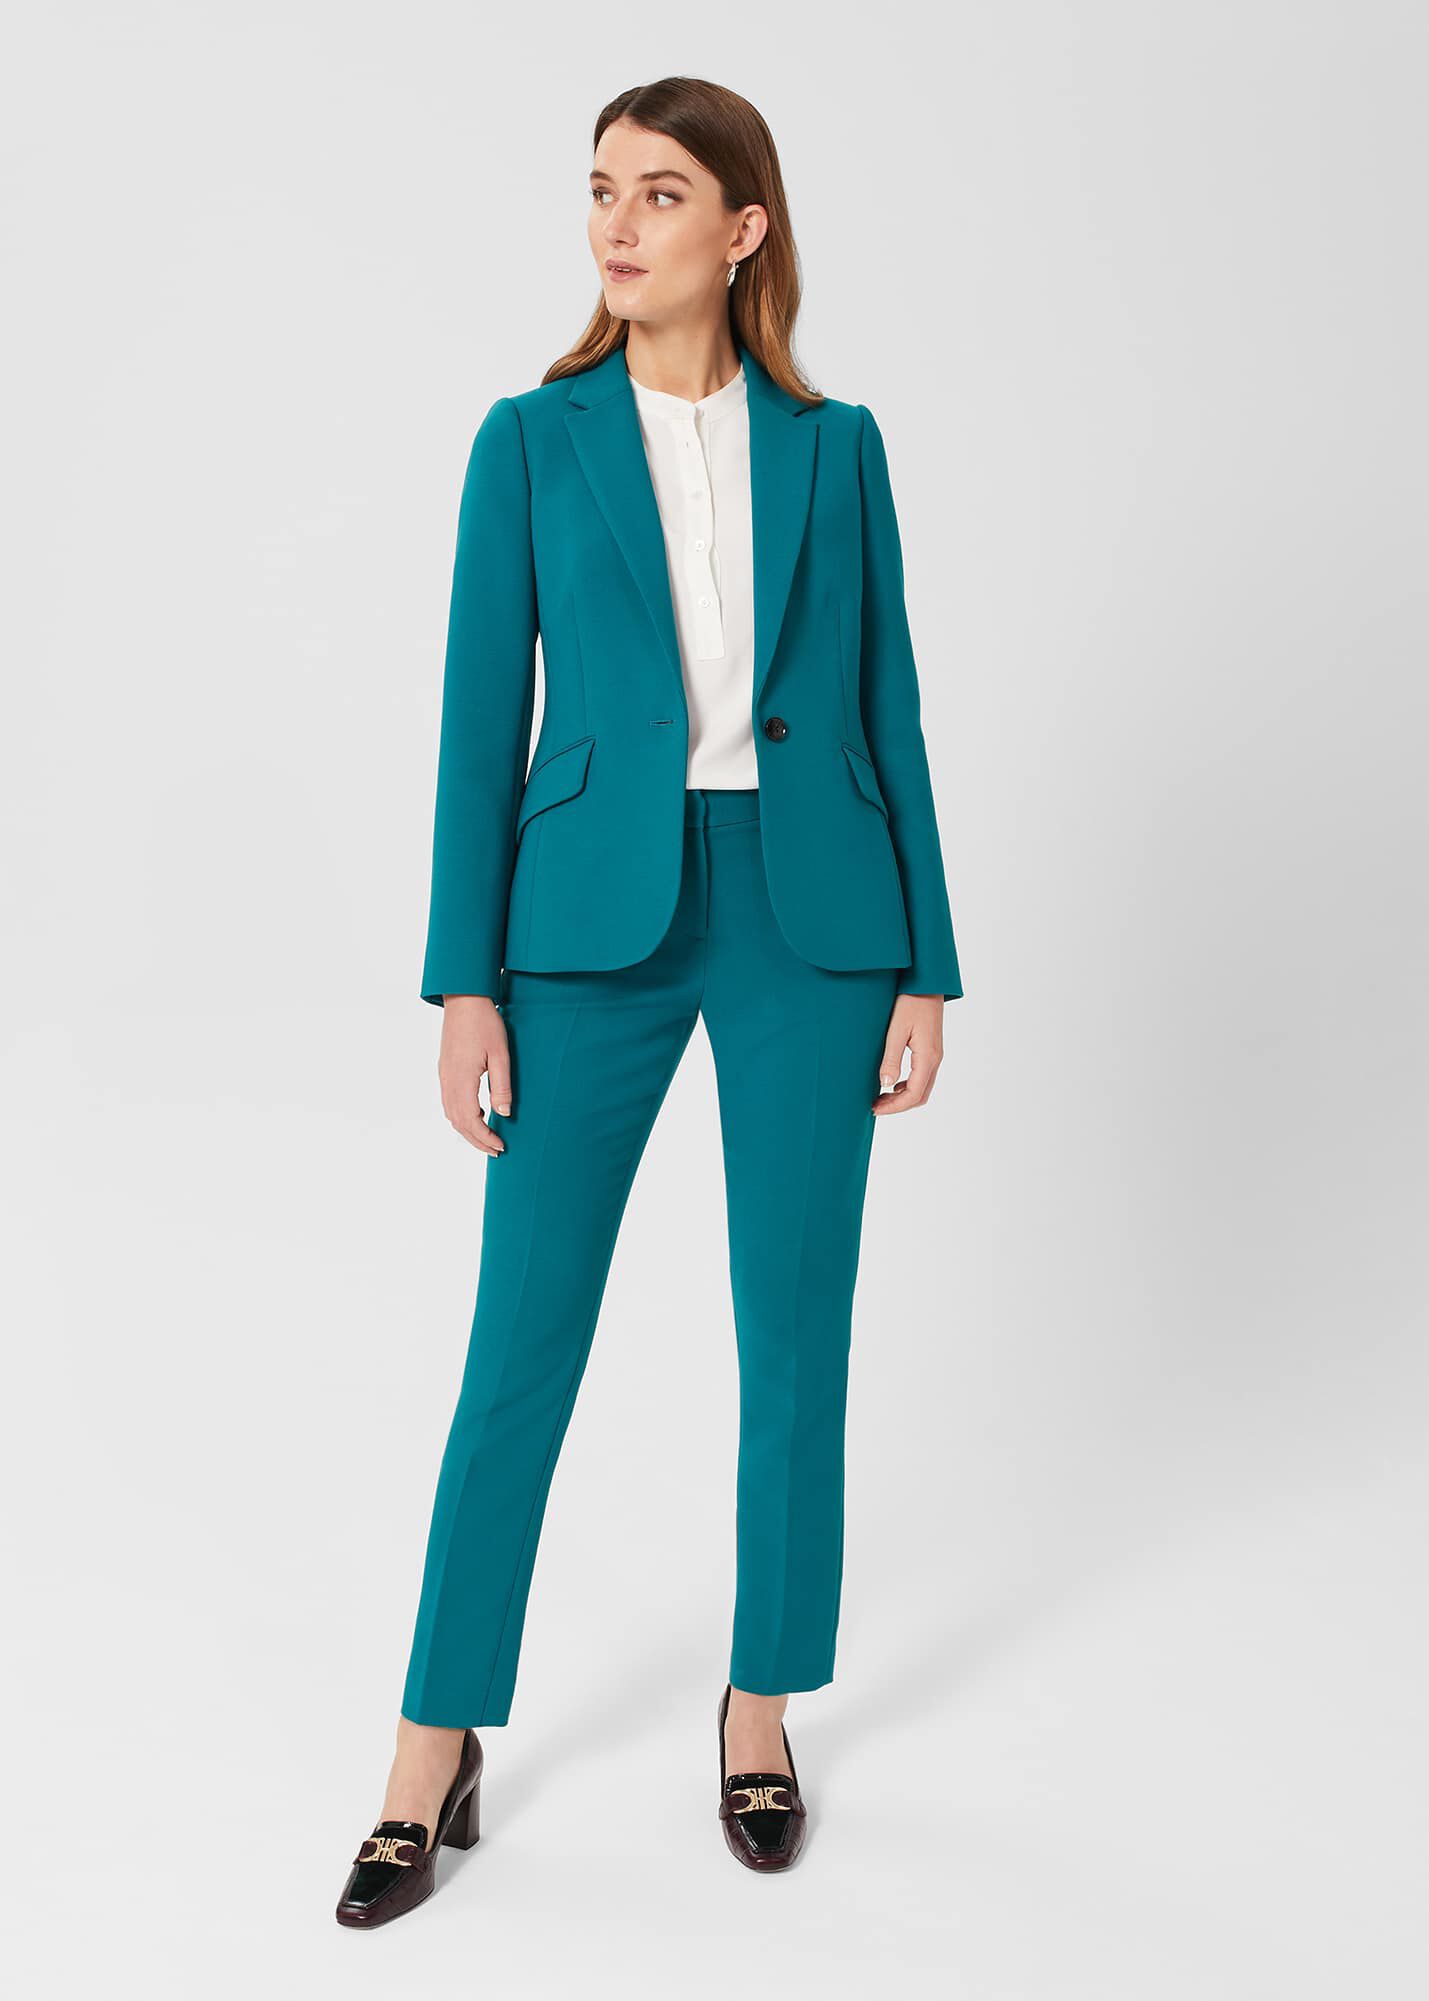 QUIZ Pale Blue Belted Trousers  New Look